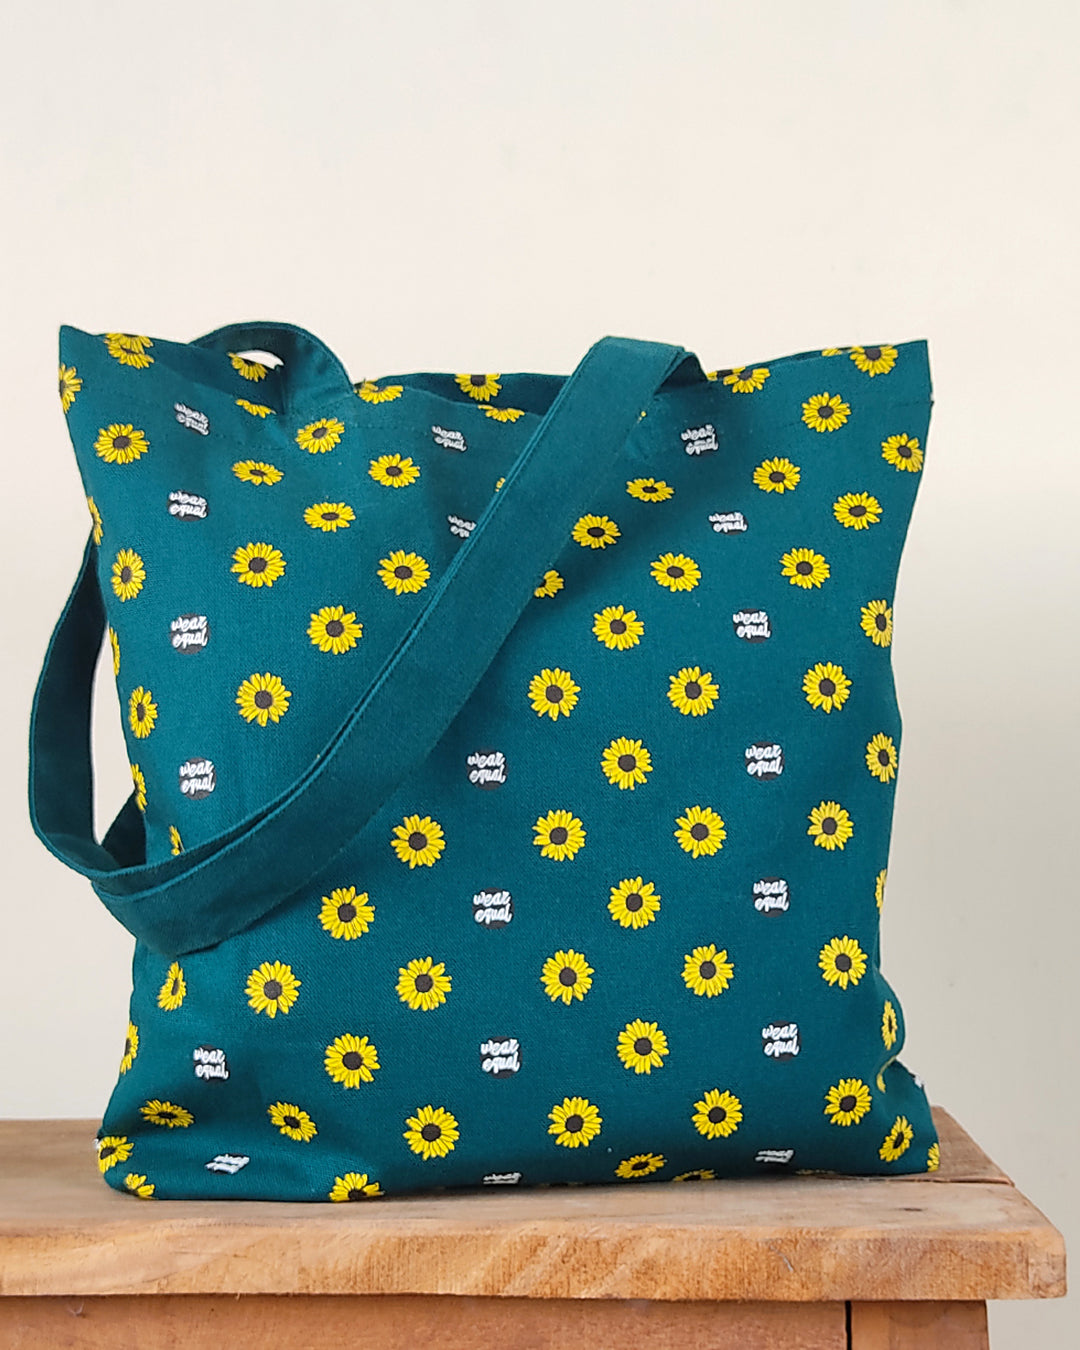 Sunflower X Wear Equal Tote Bag